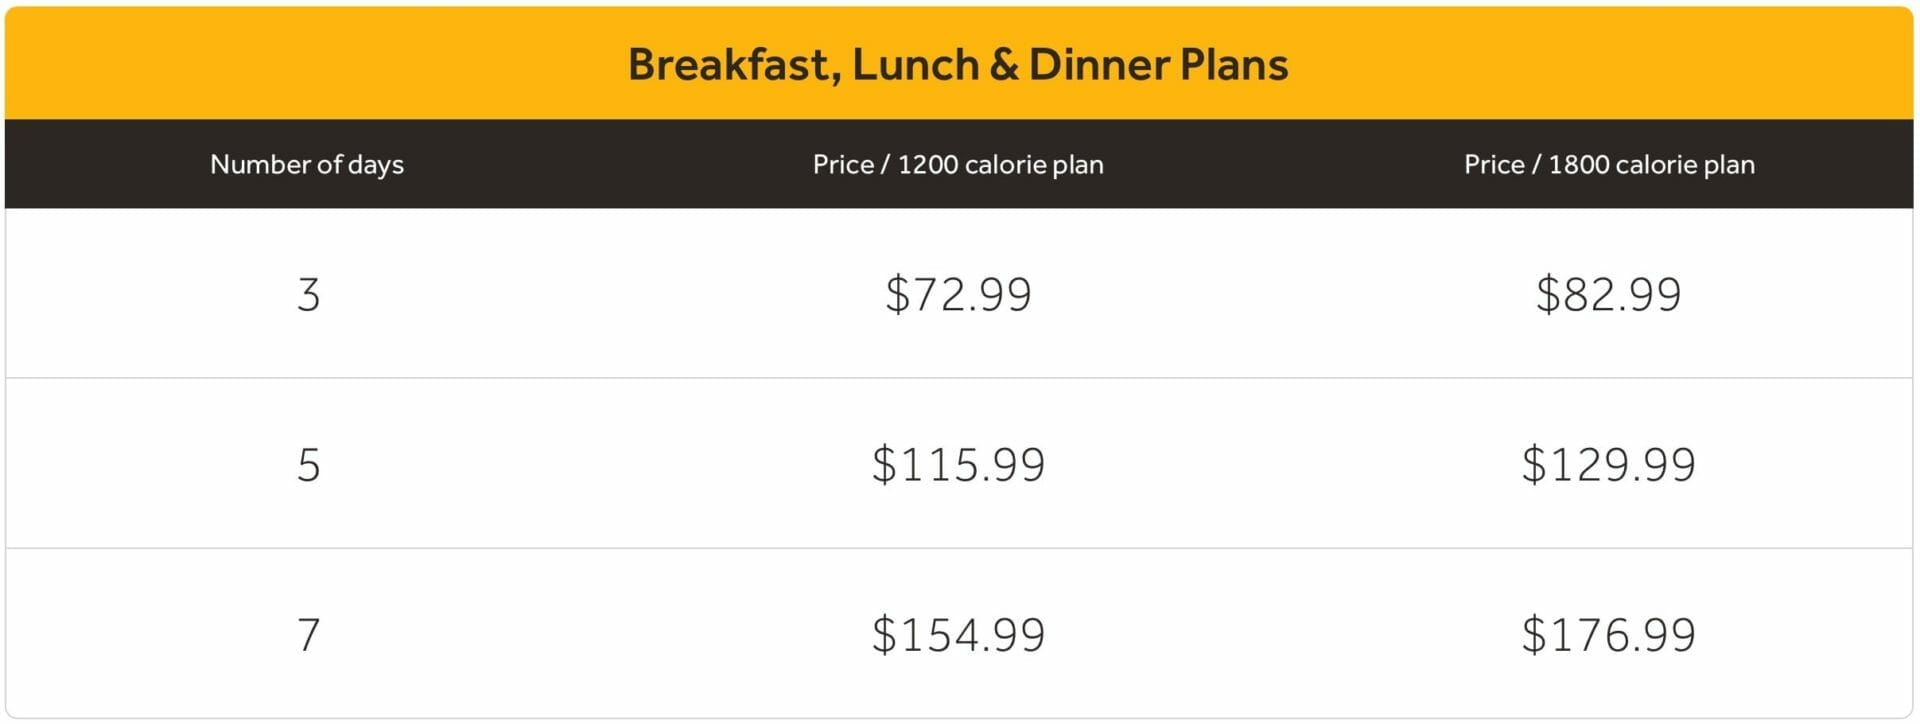 Fresh 'n Fit Cuisine - Cost of breakfast, lunch and dinner plans.